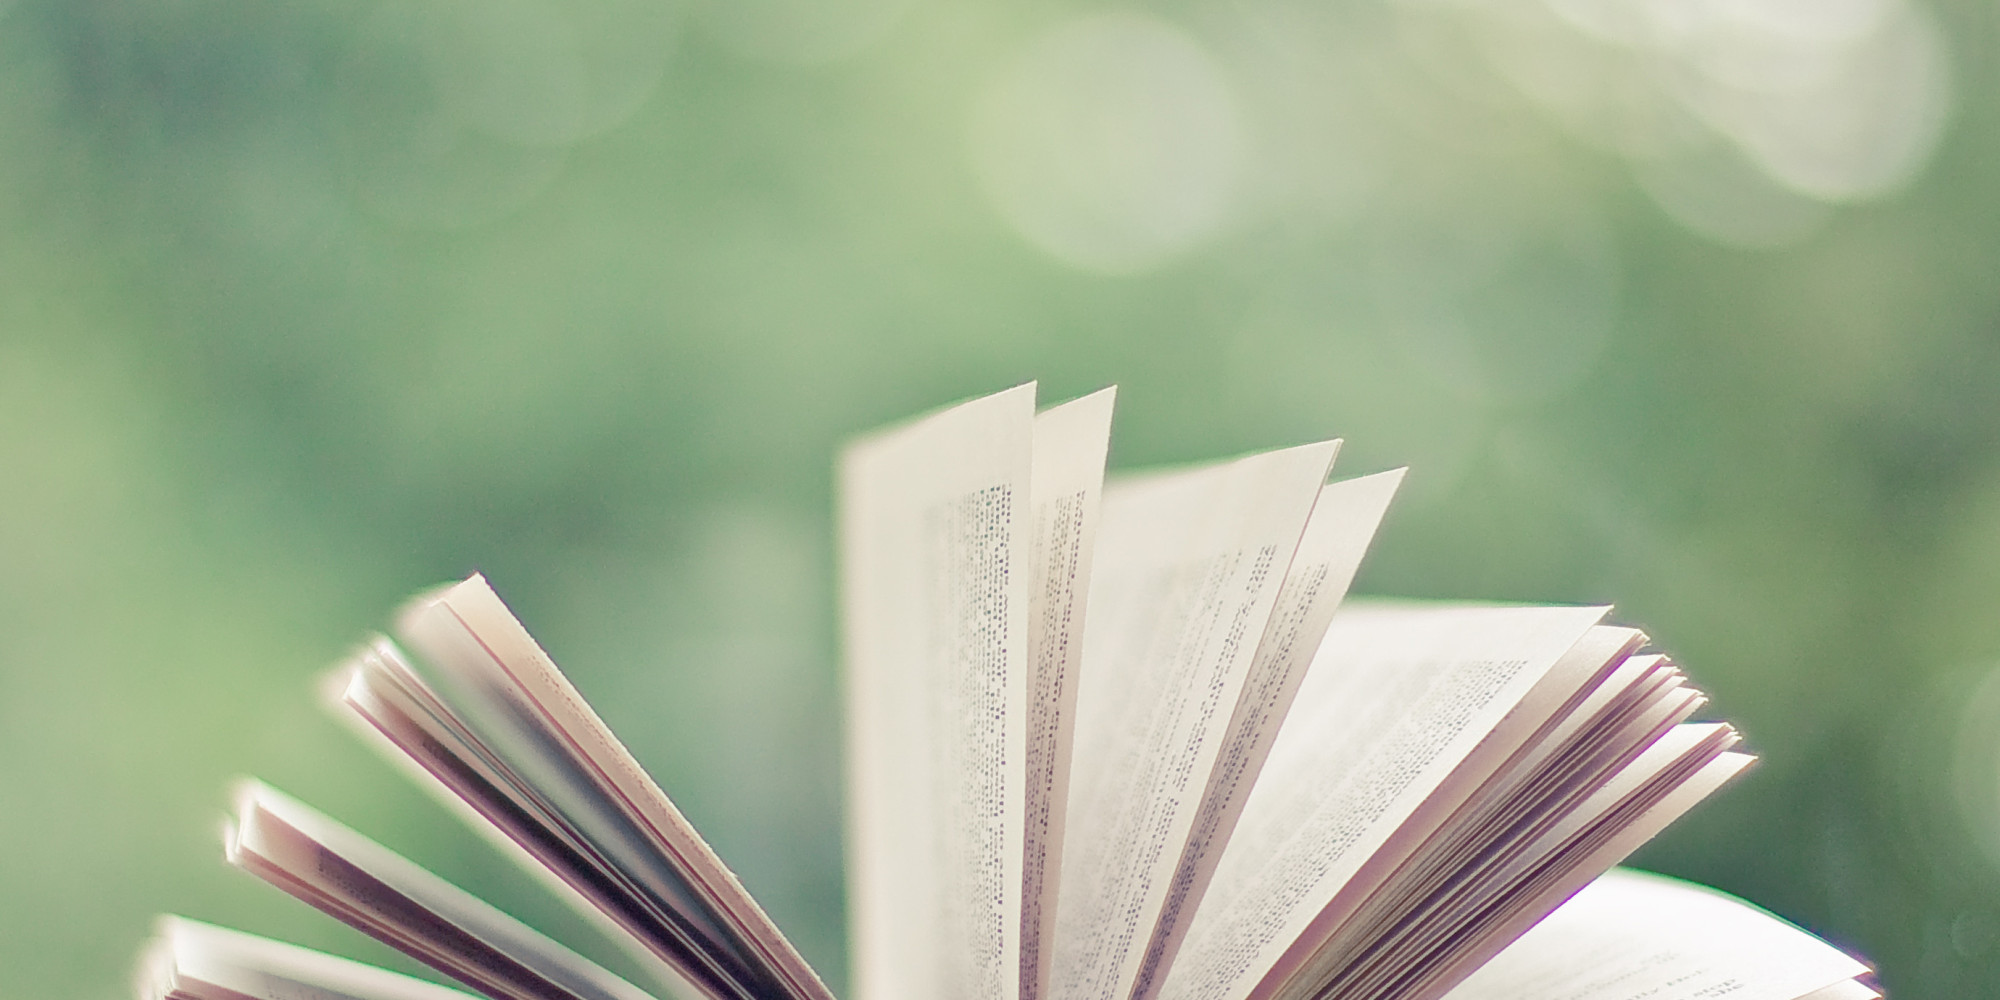 14 Questions to Help You Expertly Market Your Book | HuffPost